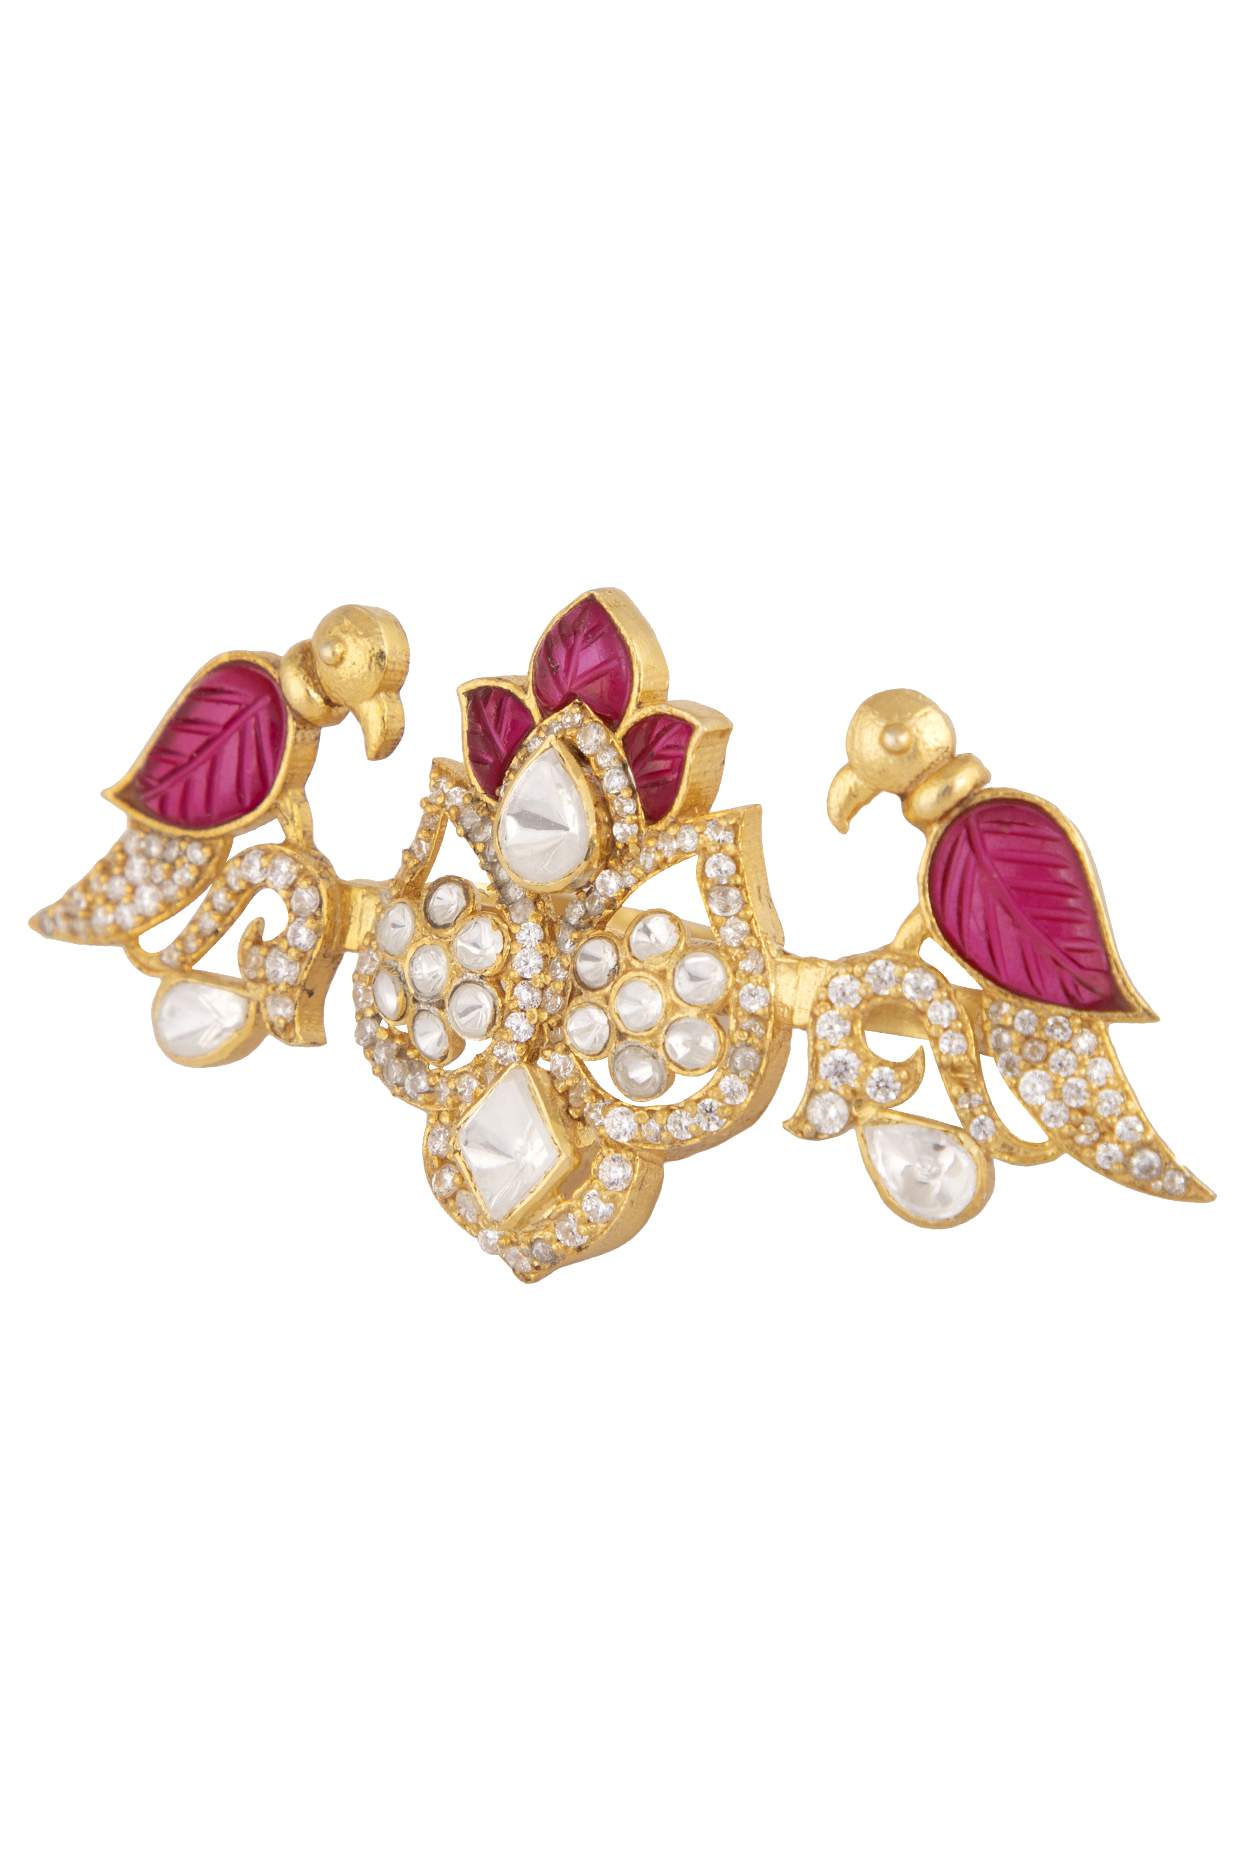 Gold Plated Silver Two Finger Ring - Amrrutam